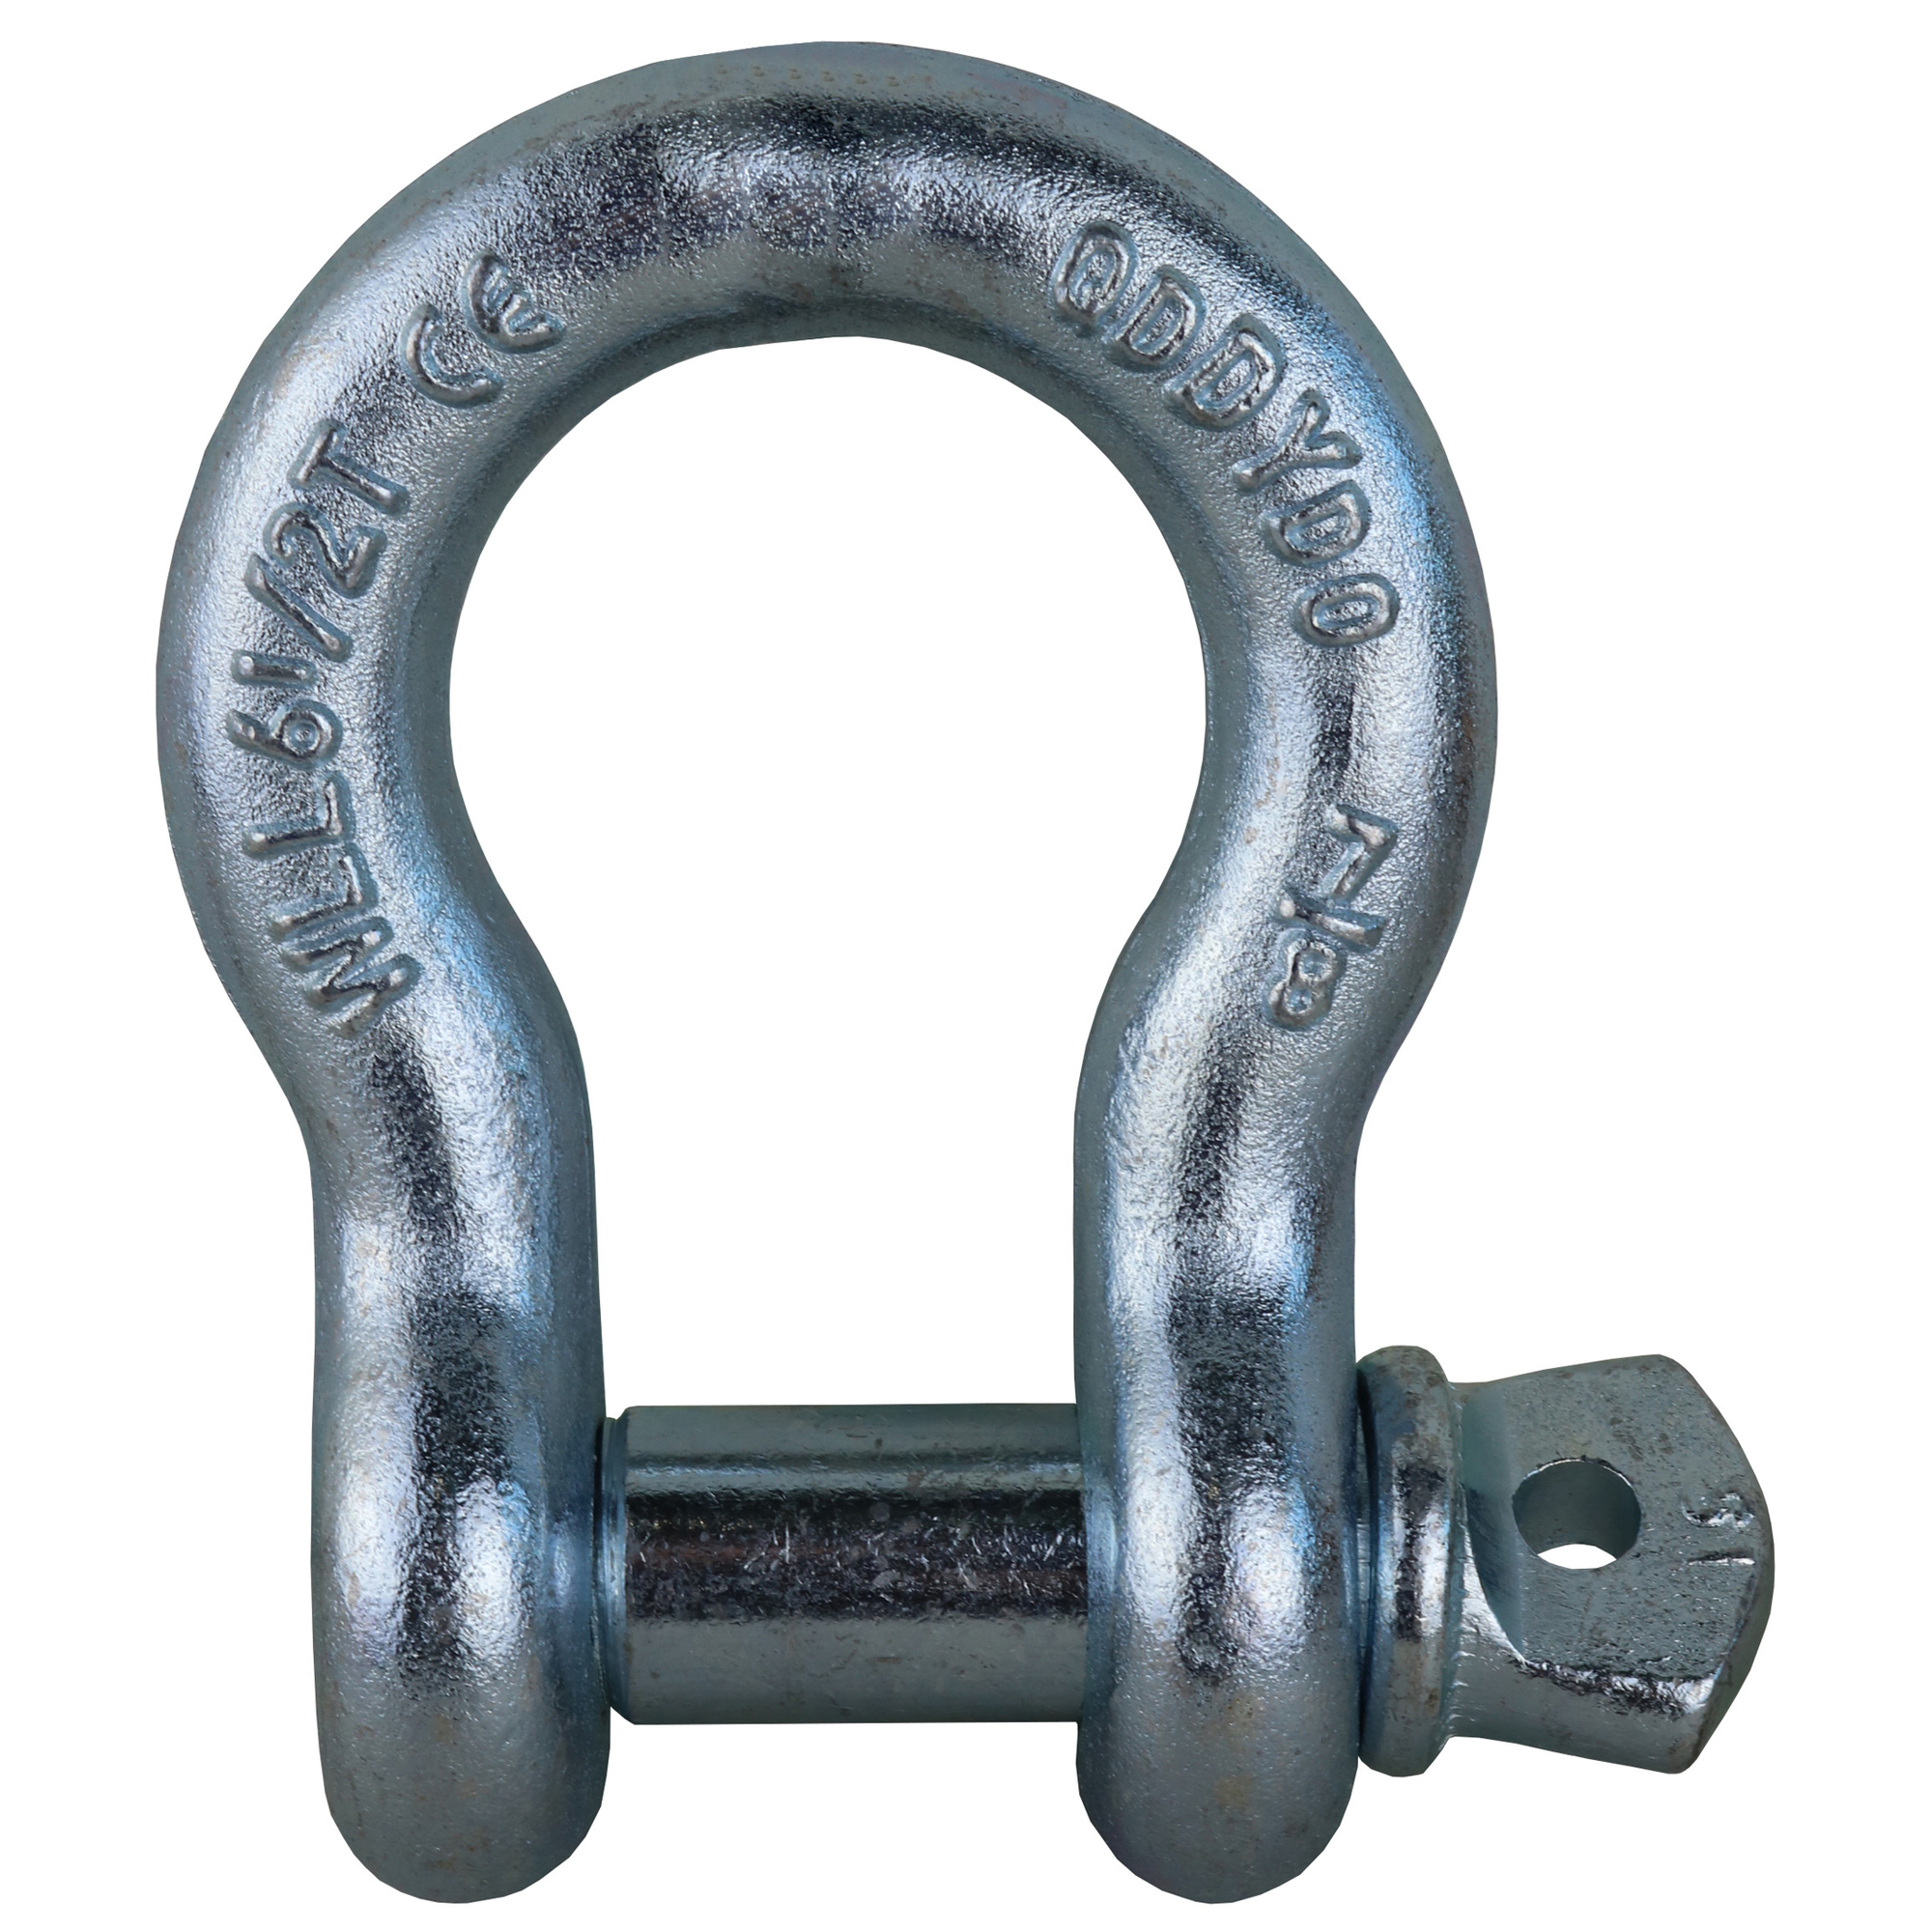 Braber Equipment, Galvanized Anchor Shackle, 7/8InchBody, 1Inch Pin, Working Load Limit 13000 lb, Model 64.400.027